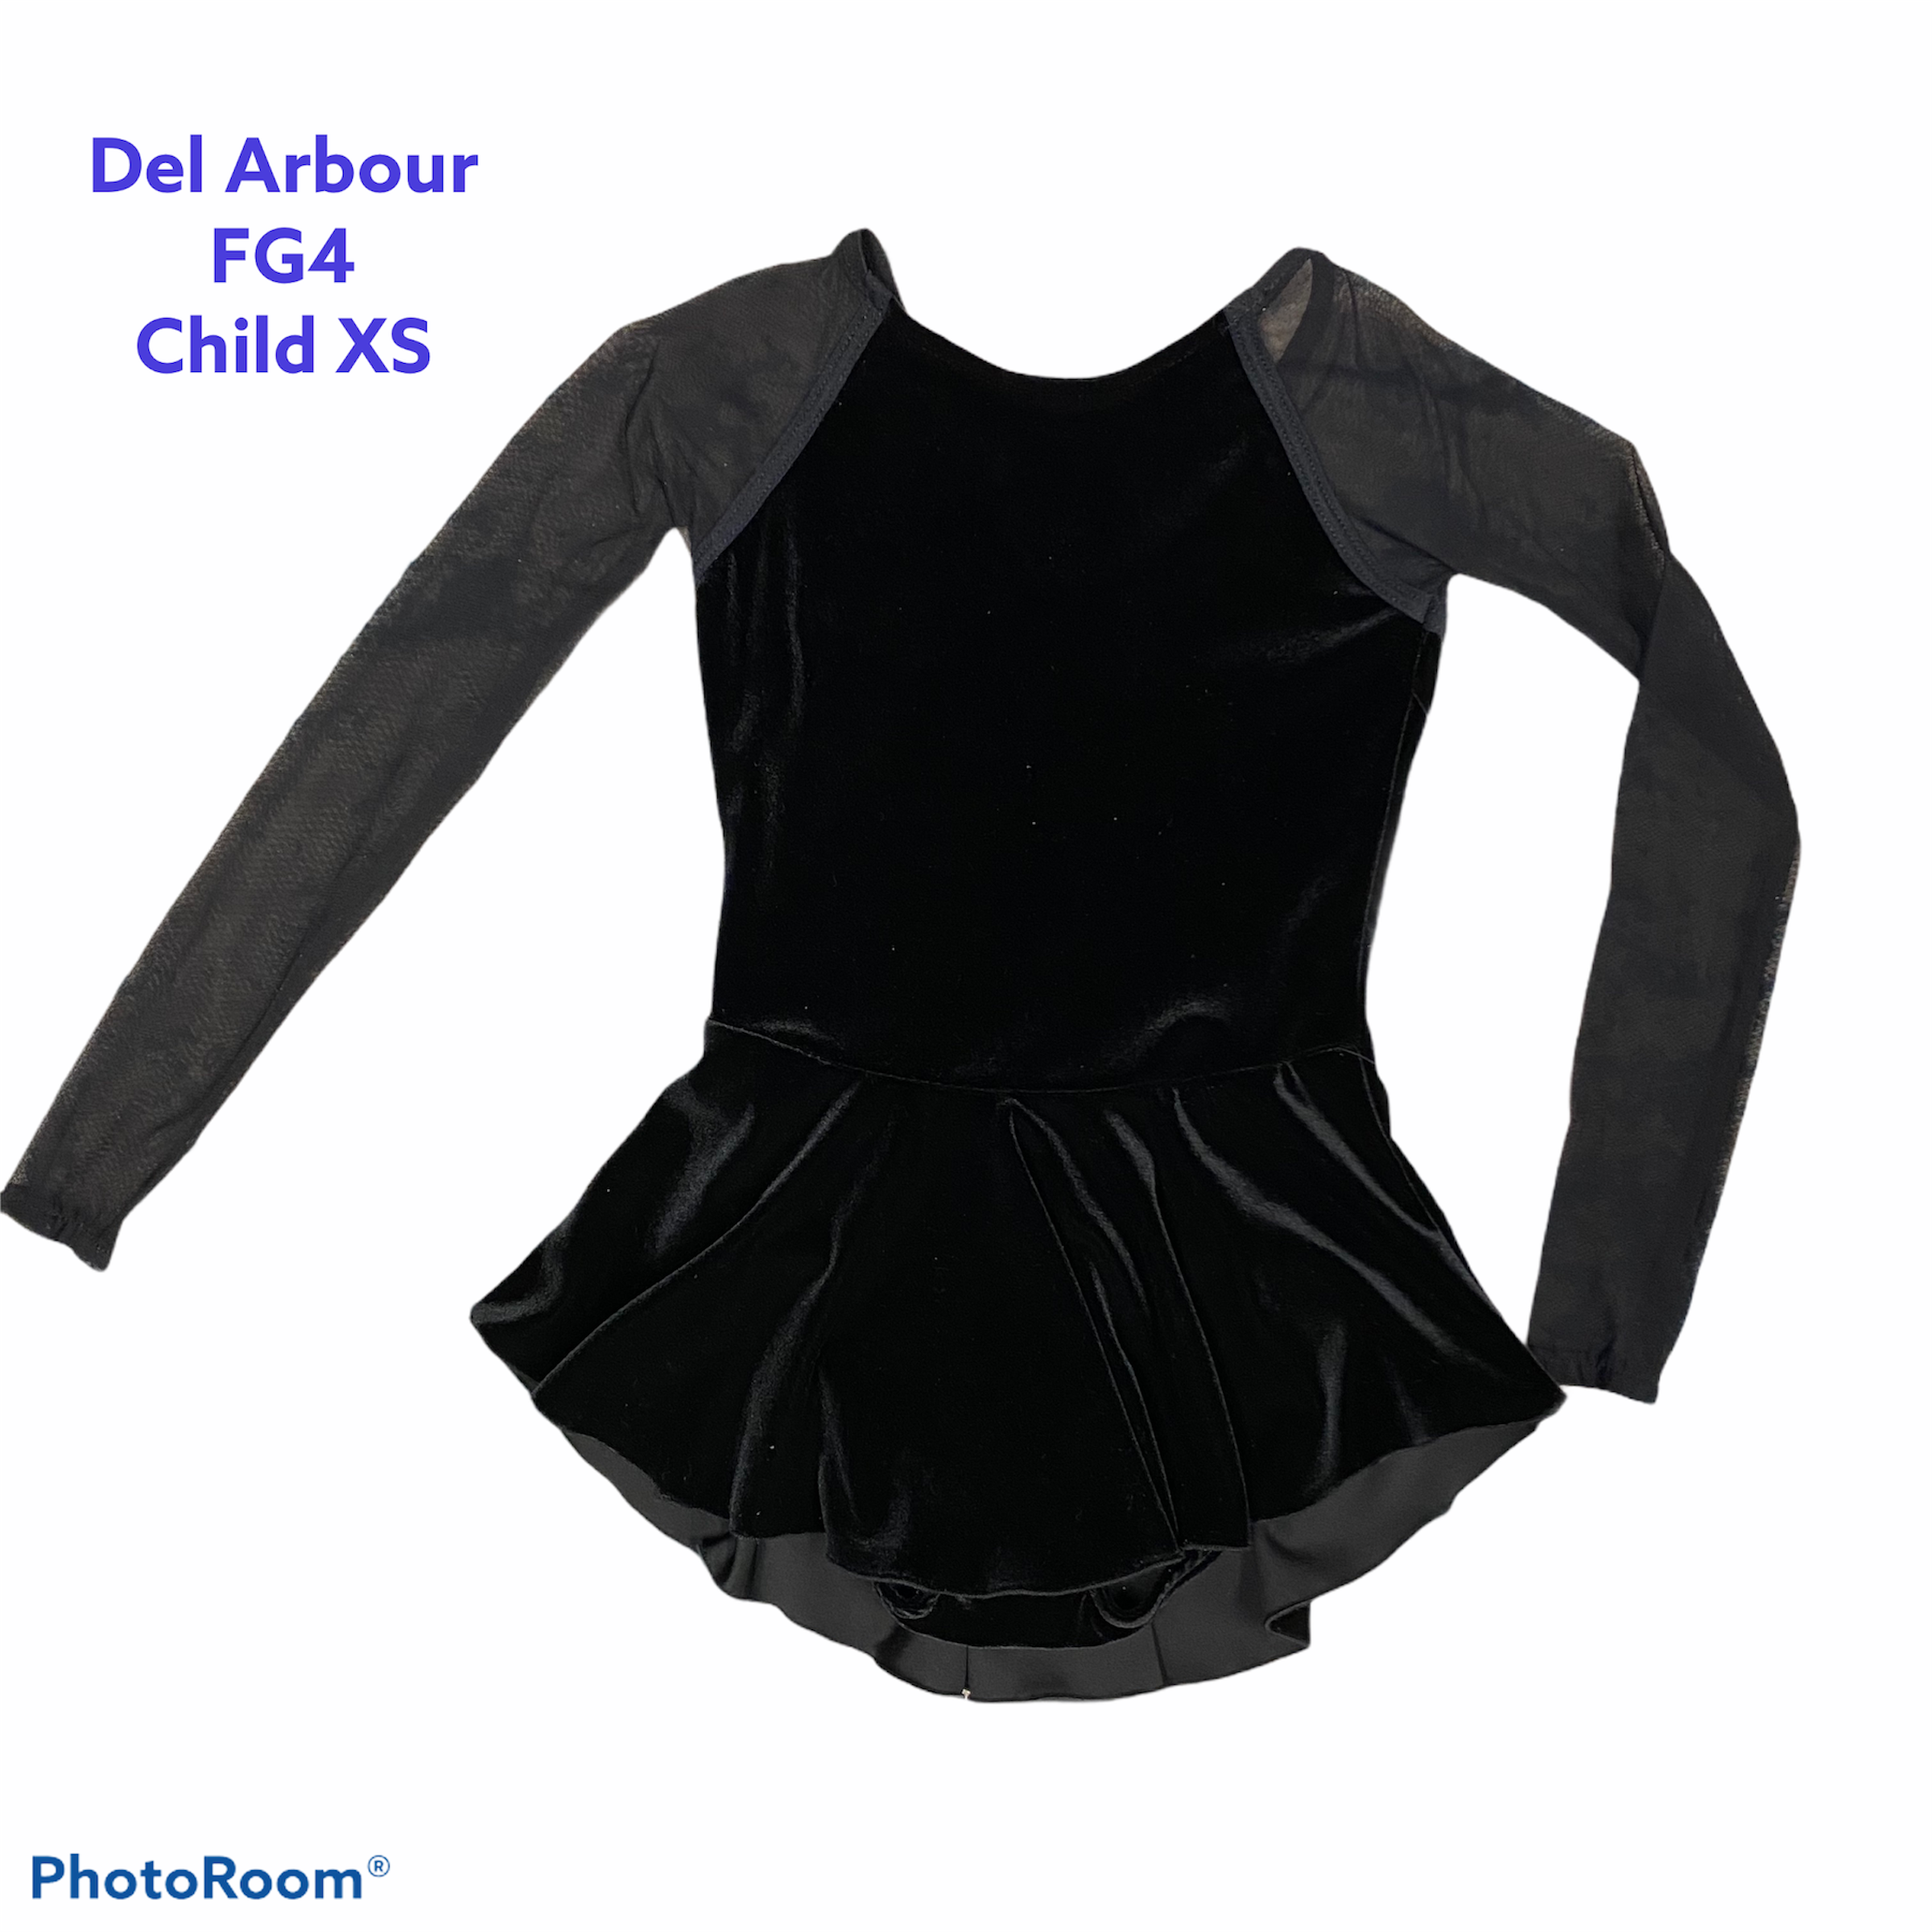 Figure Skating Dress OFFICIAL DEL ARBOUR FIRST GLIDE 2 